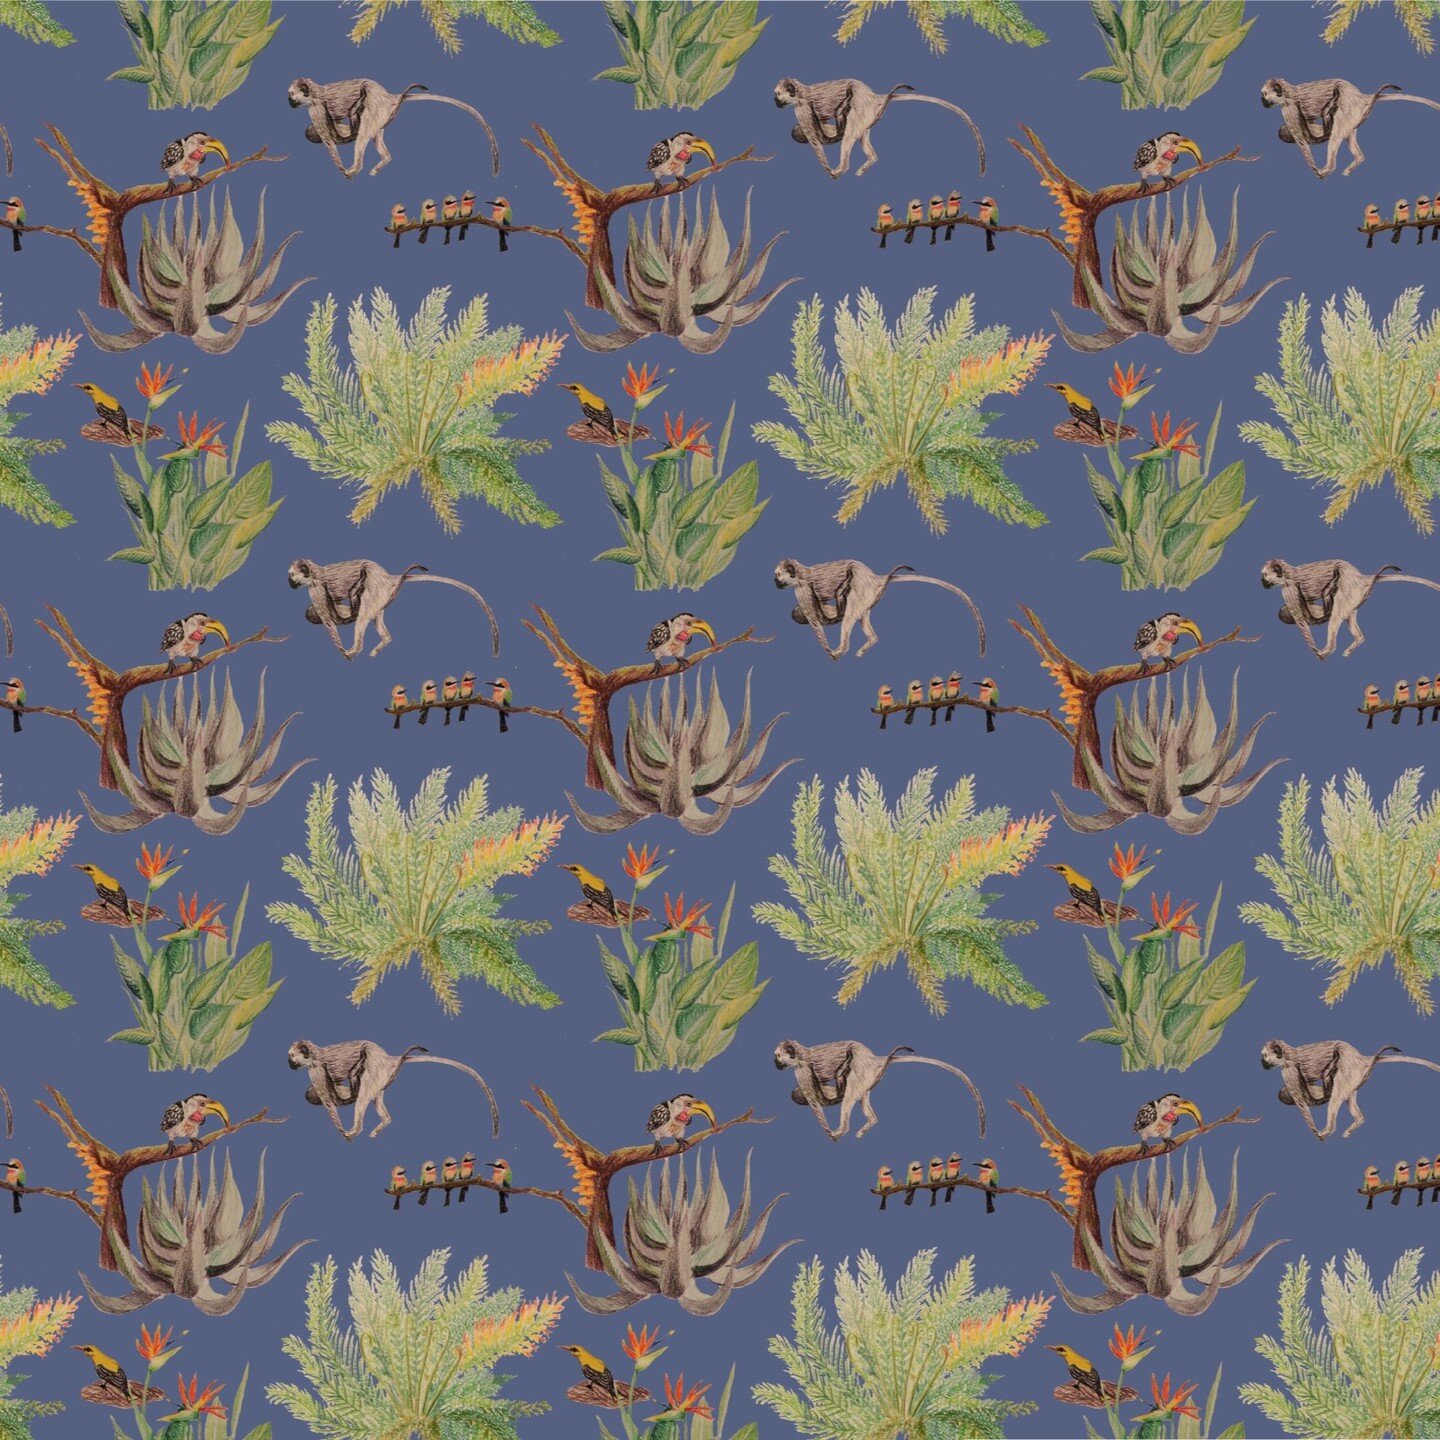 I drew this #pattern two years ago and have only today got round to trying the #PatternPreview on Photoshop to try to balance out the images. I now wish that I&rsquo;d started it on #photoshop rather than on paper with pencil to avoid the background 